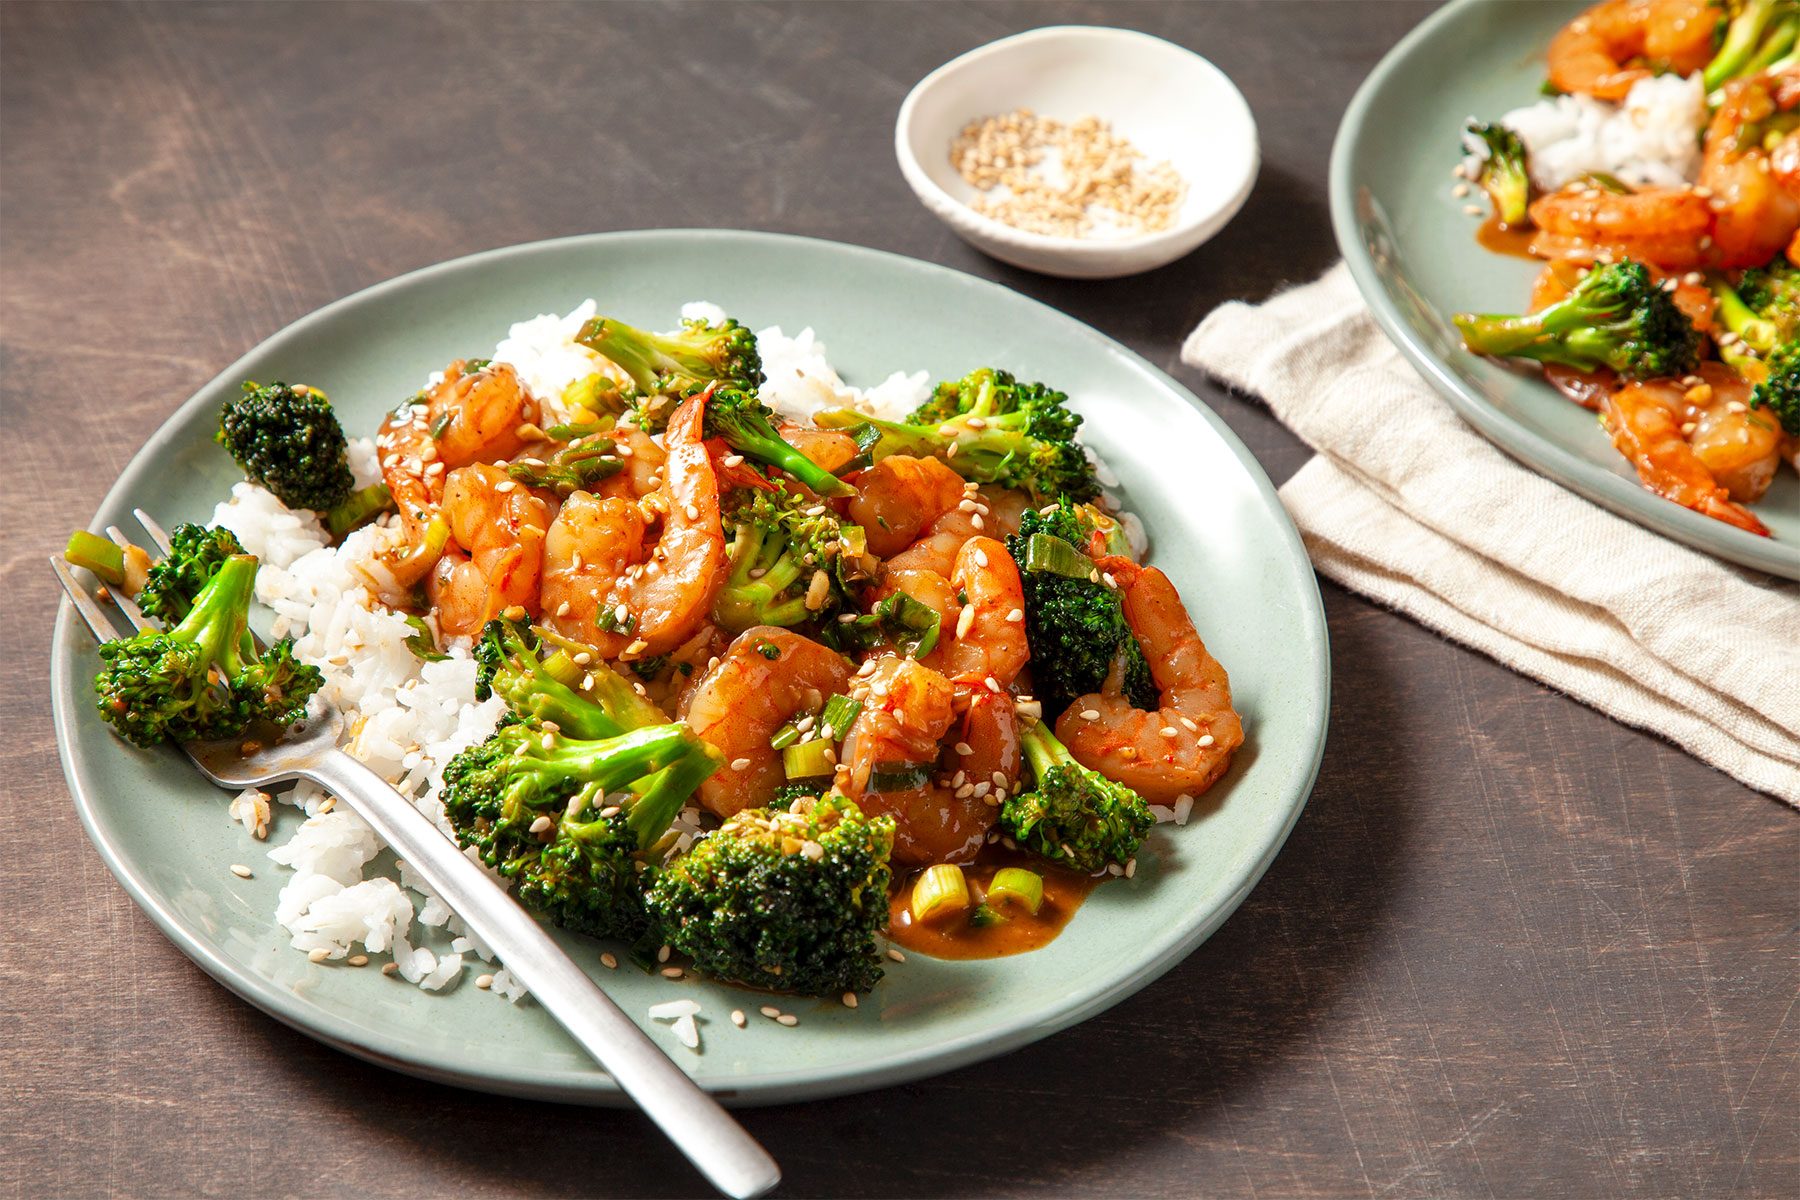 Shrimp And Broccoli Stir Fry served with rice on plate